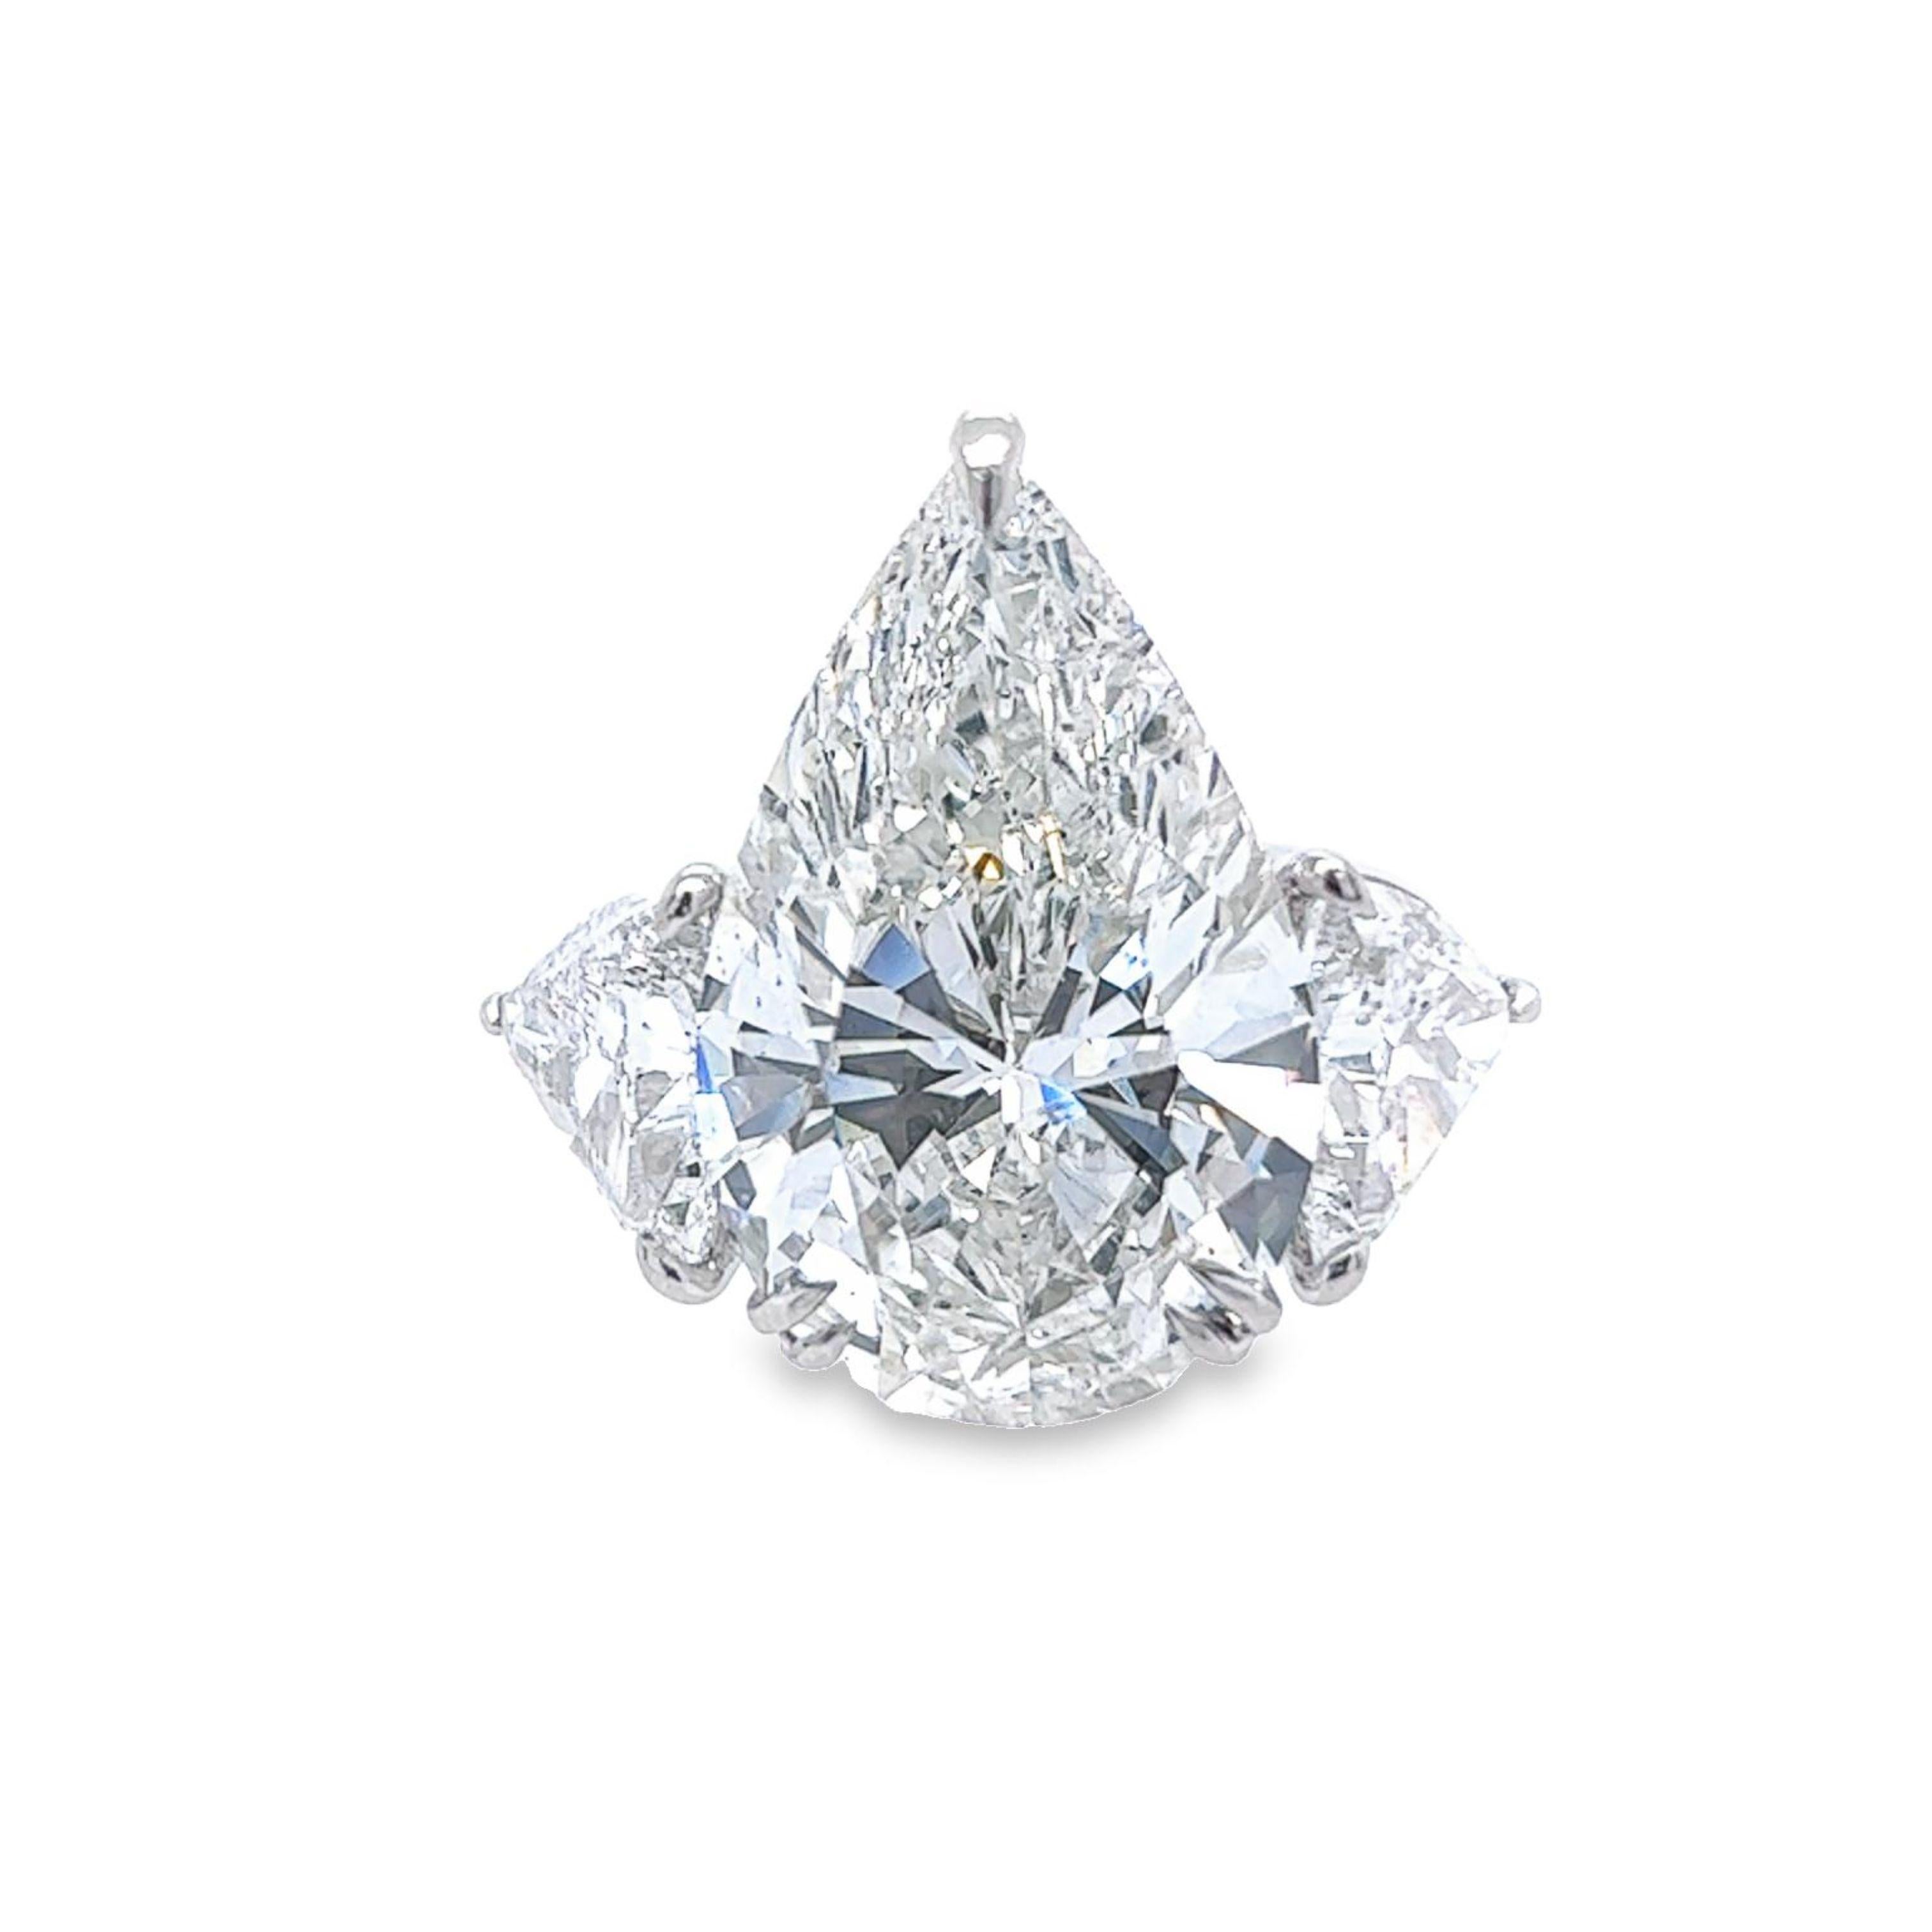 Rosenberg Diamonds & Co. 13.34 carat Pear shape H color SI2 clarity is accompanied by a GIA certificate. This exceptional  SI2 Pear shape is set in a handmade platinum setting with perfectly matched pair of trillion side stones flanking on both